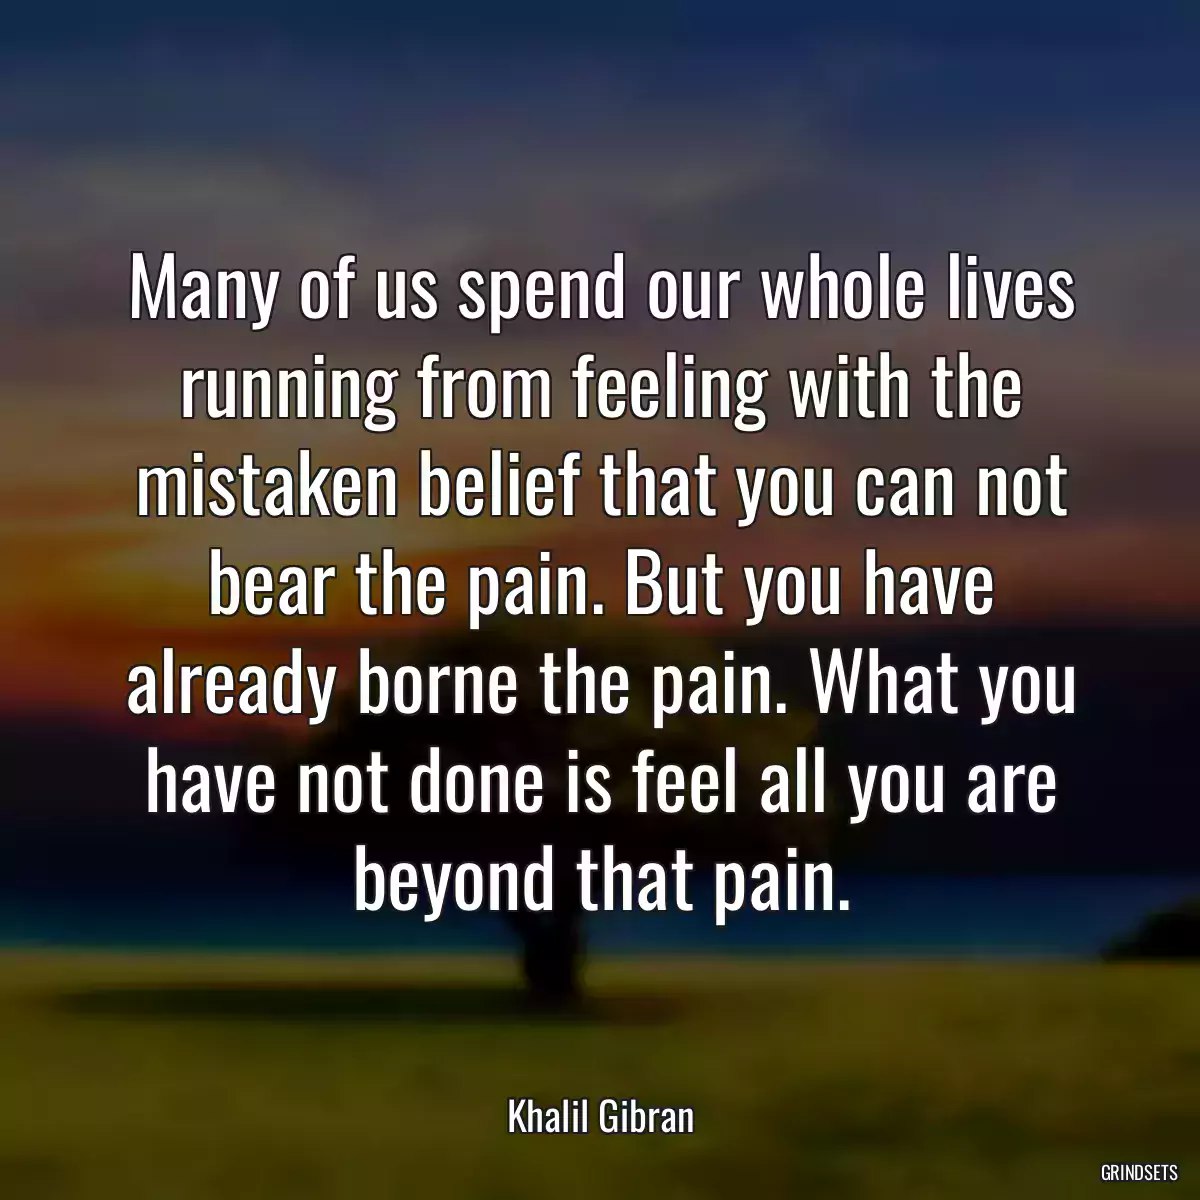 Many of us spend our whole lives running from feeling with the mistaken belief that you can not bear the pain. But you have already borne the pain. What you have not done is feel all you are beyond that pain.